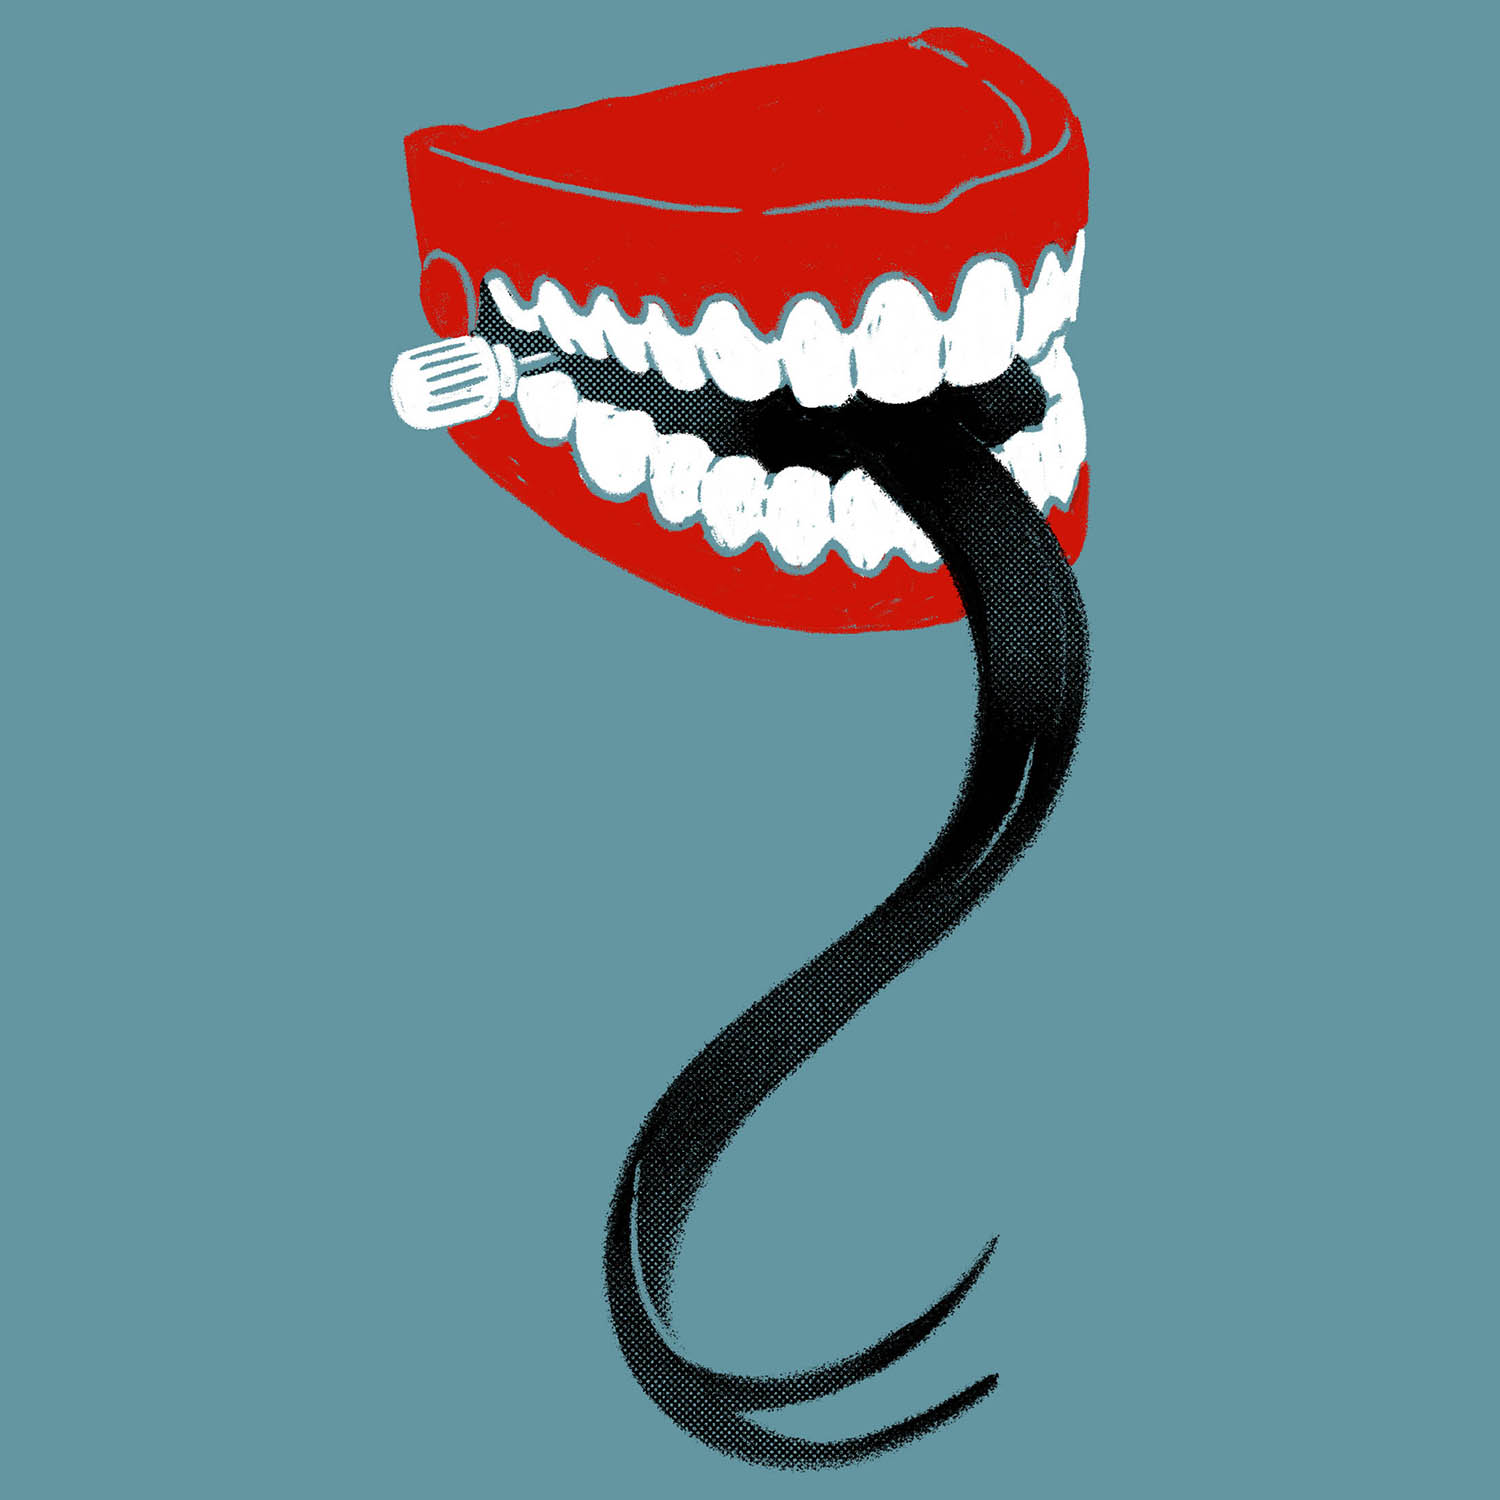 illustration of mechanical teeth with a long protruding snake tongue.